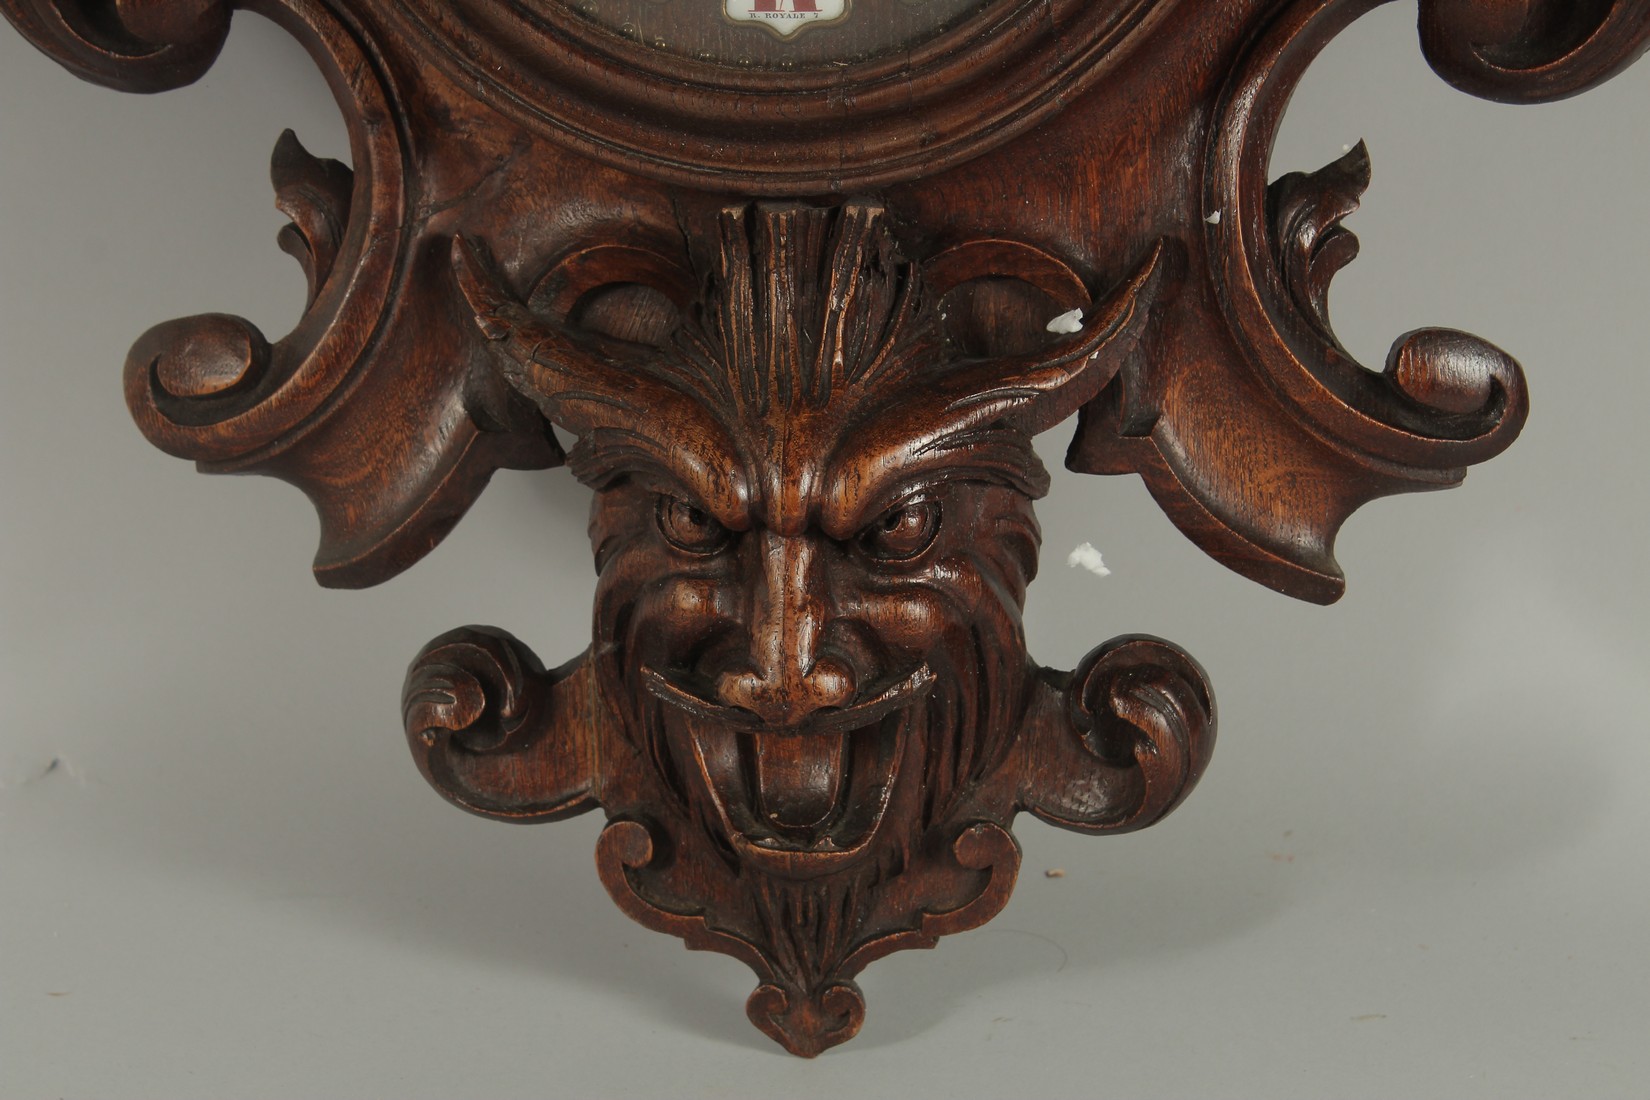 A LARGE CARVED WOOD CLOCK with urns and acanthus scrolls. 28ins high. - Image 3 of 5